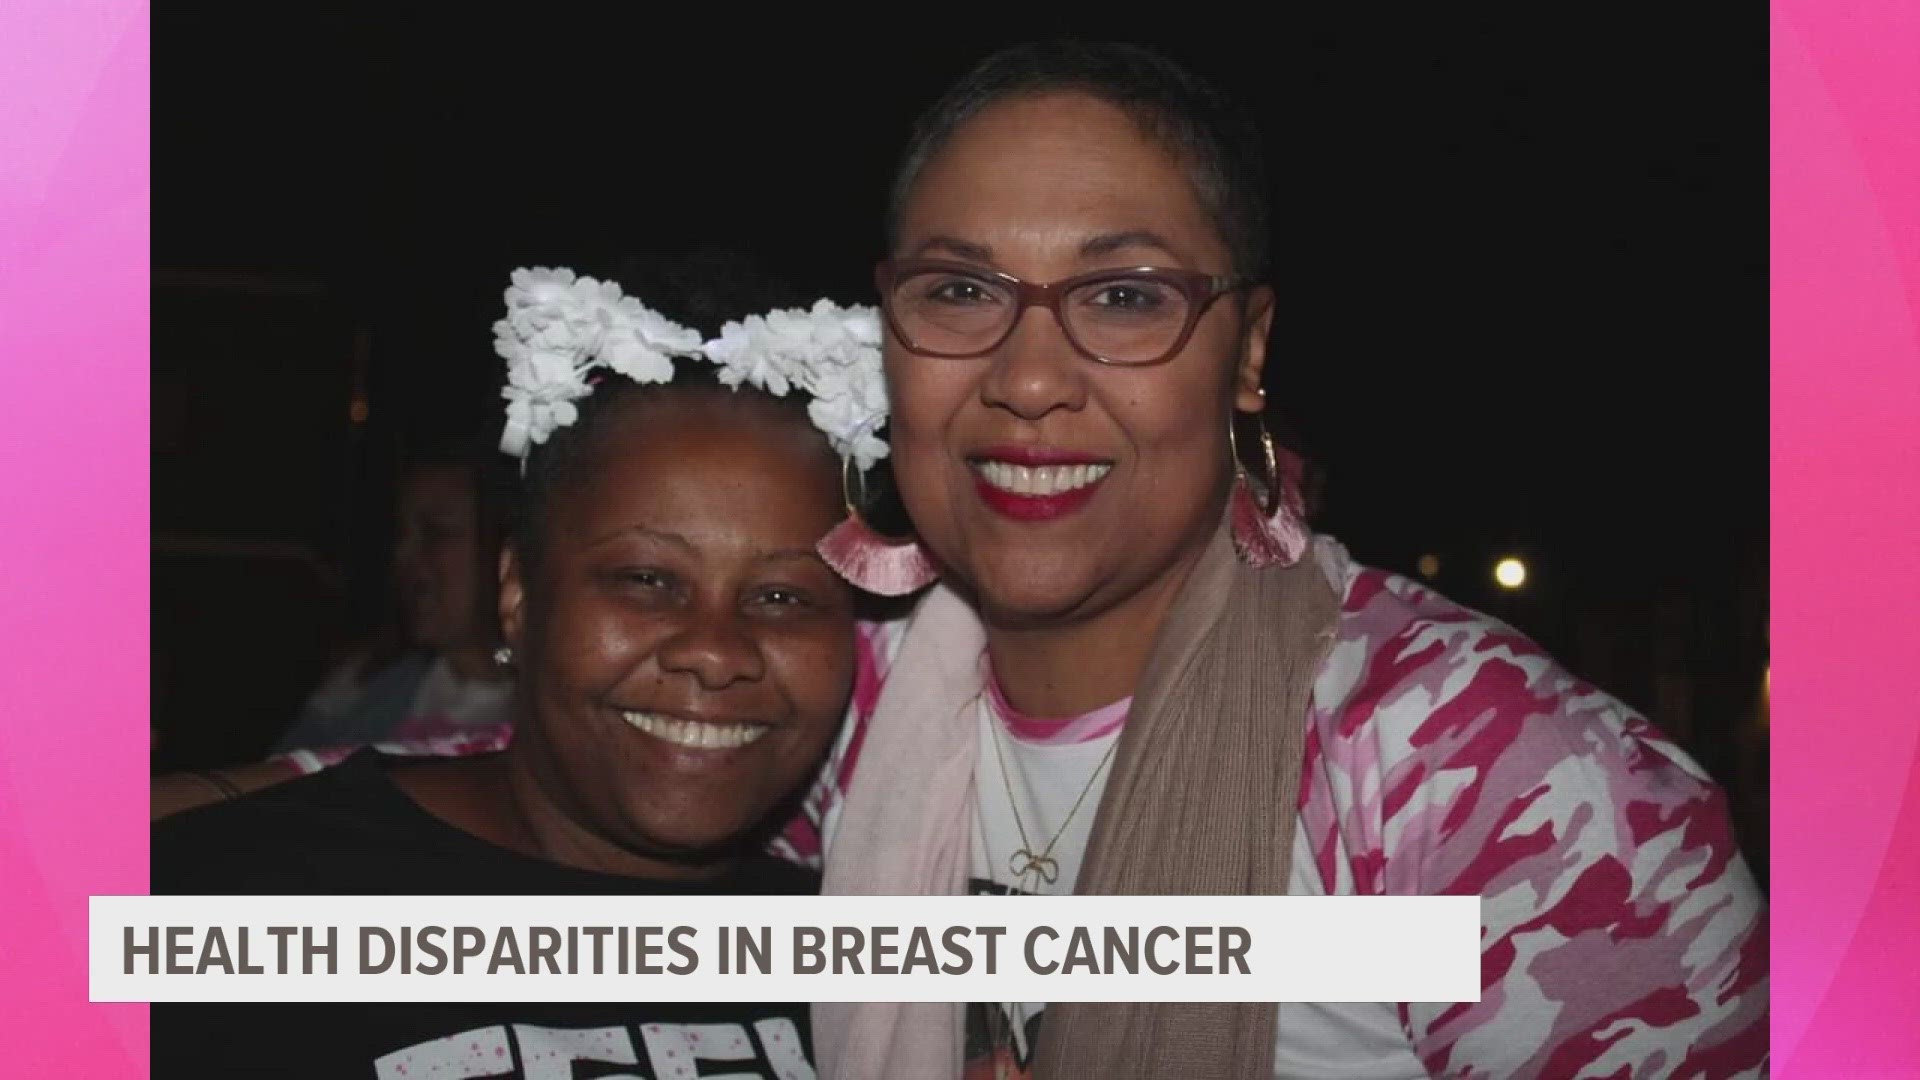 Despite having a lower incidence rate of breast cancer compared to white women, Black women are 40% more likely to die from the disease than white women.